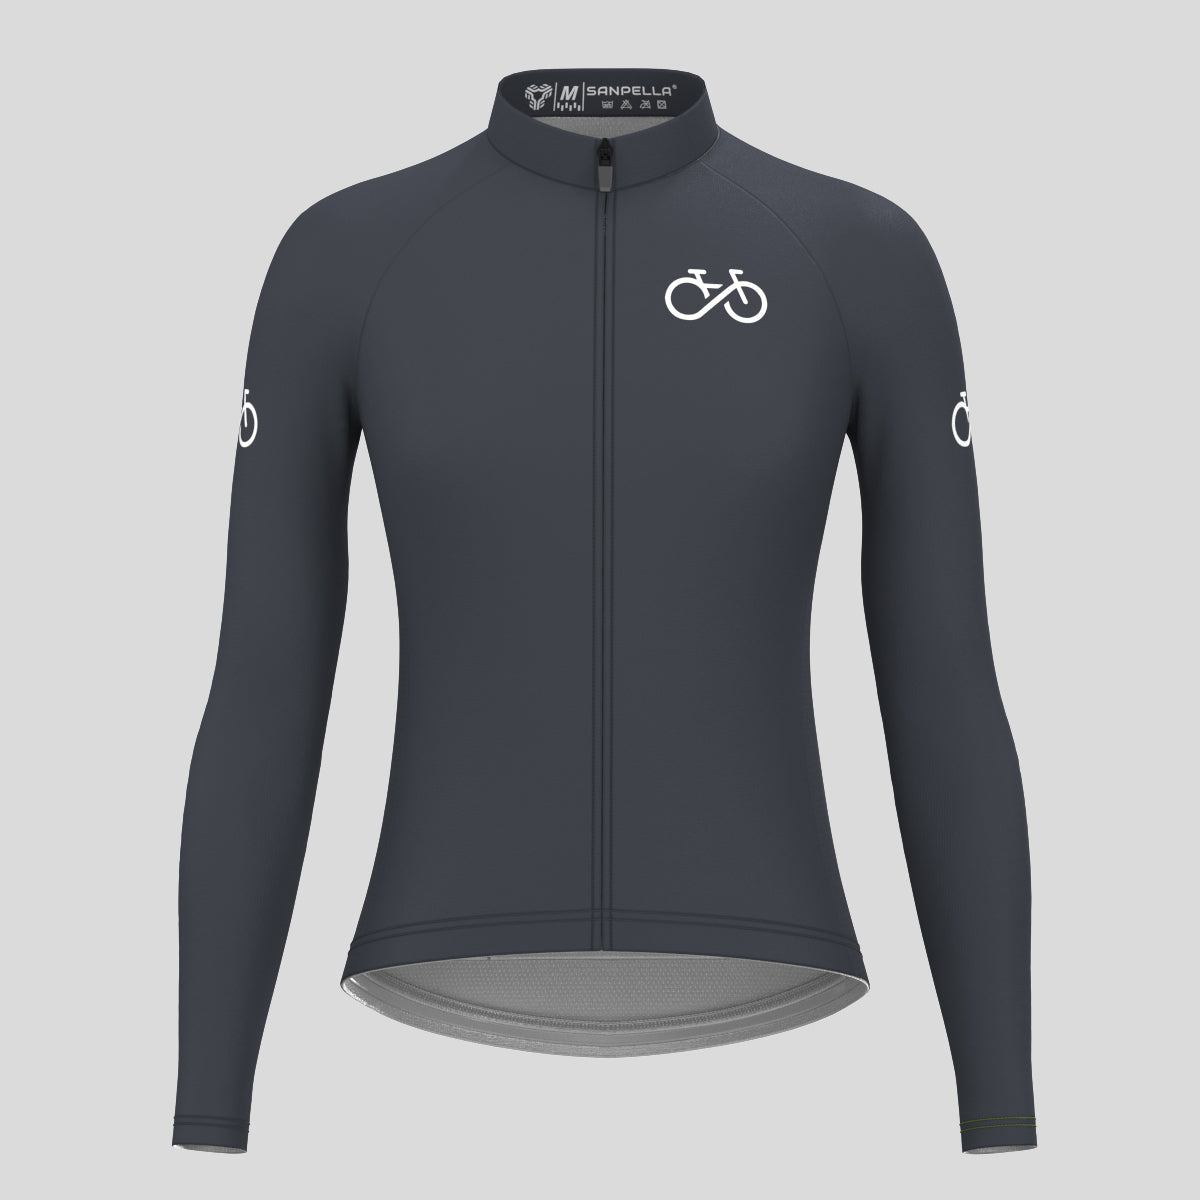 Ride Forever Women's LS Cycling Jersey - Graphite